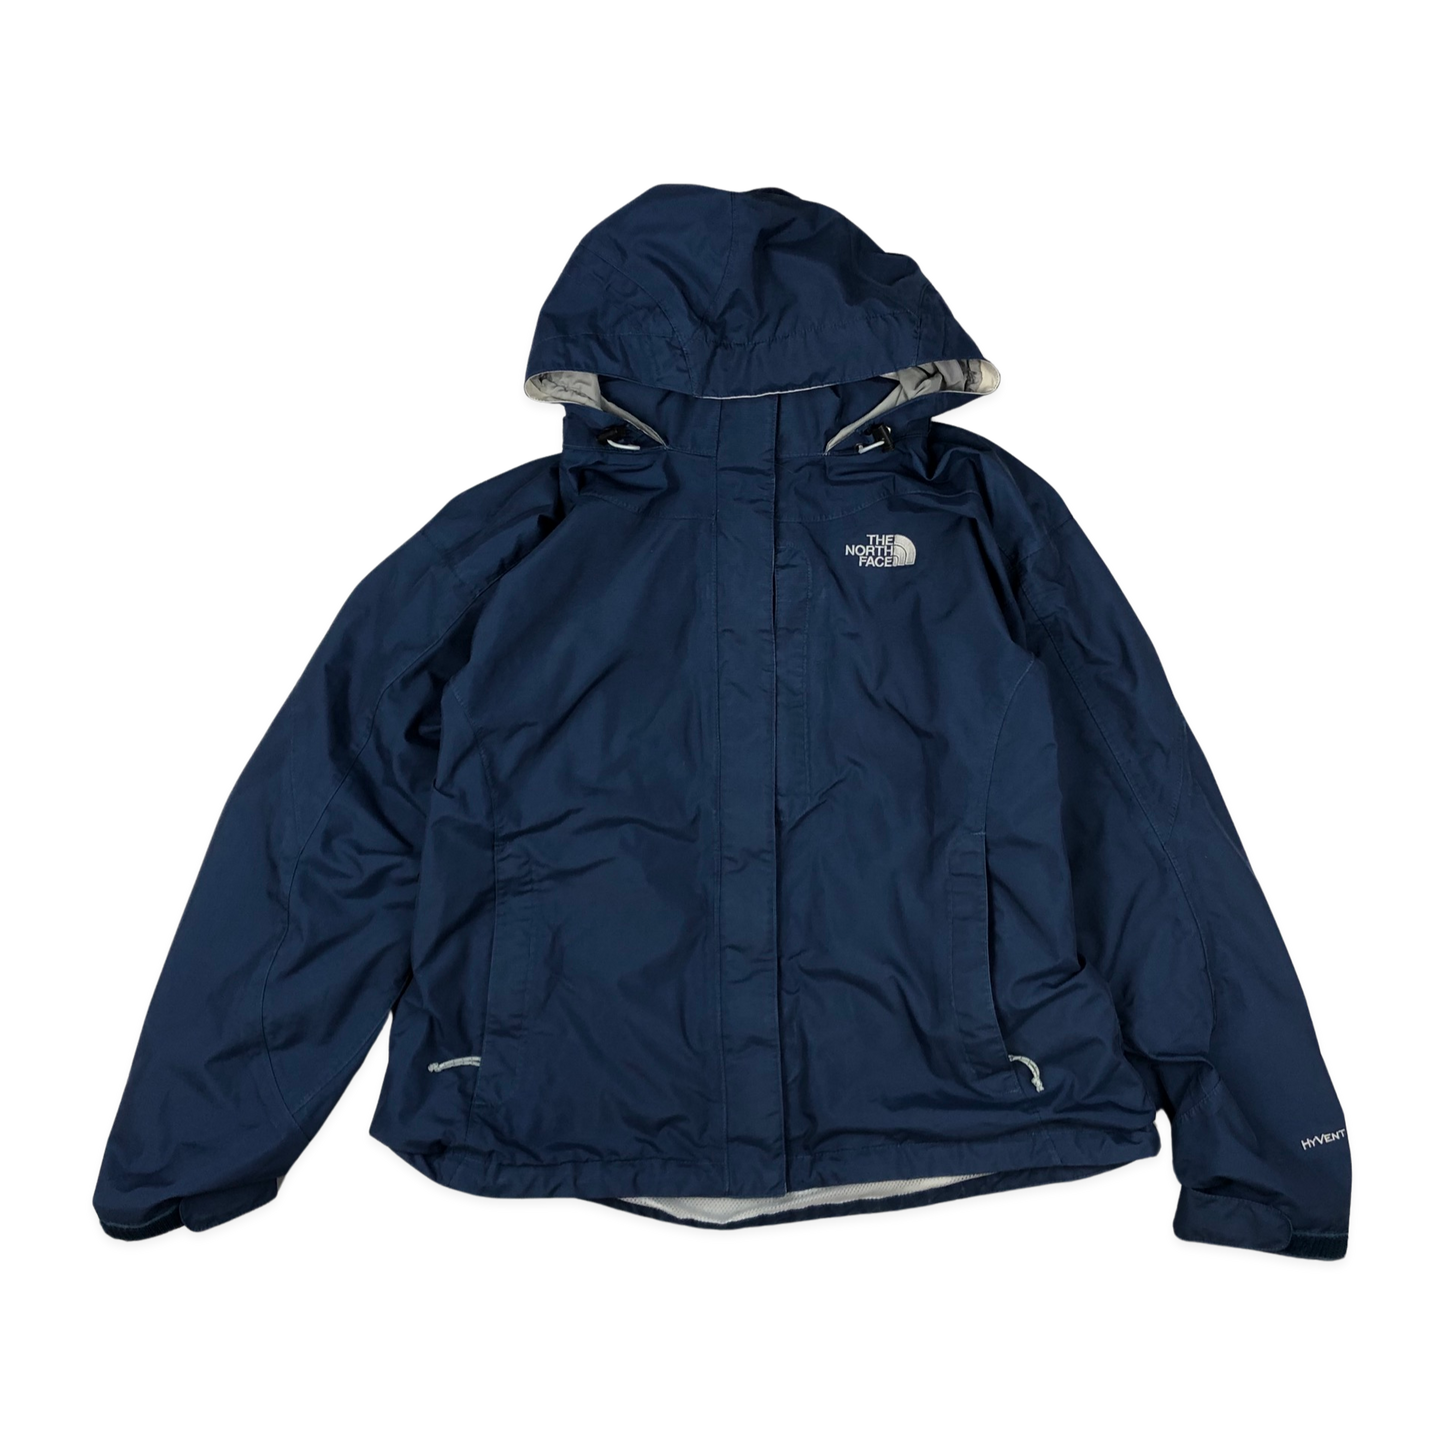 Vintage The North Face Navy HyVent Jacket L